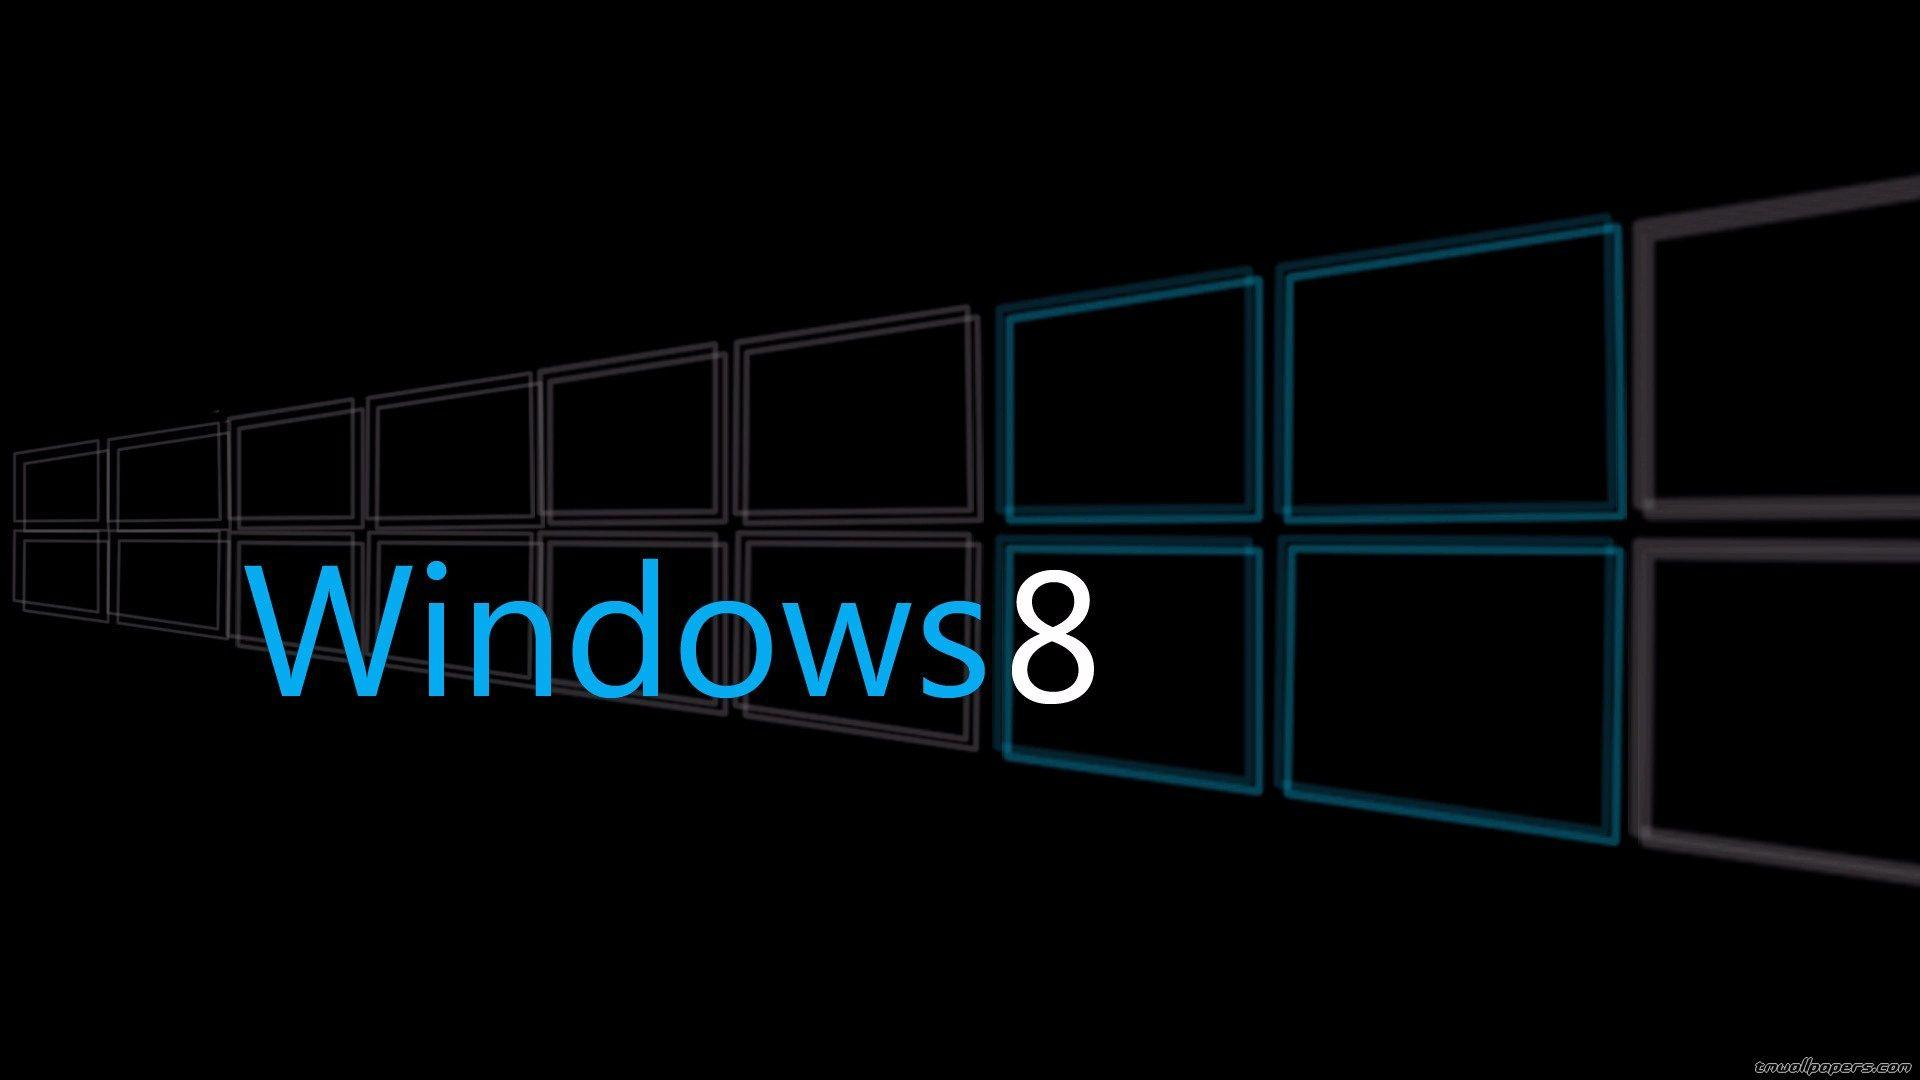 Windows 8 Black Wallpapers and Backgrounds 4K, HD, Dual Screen